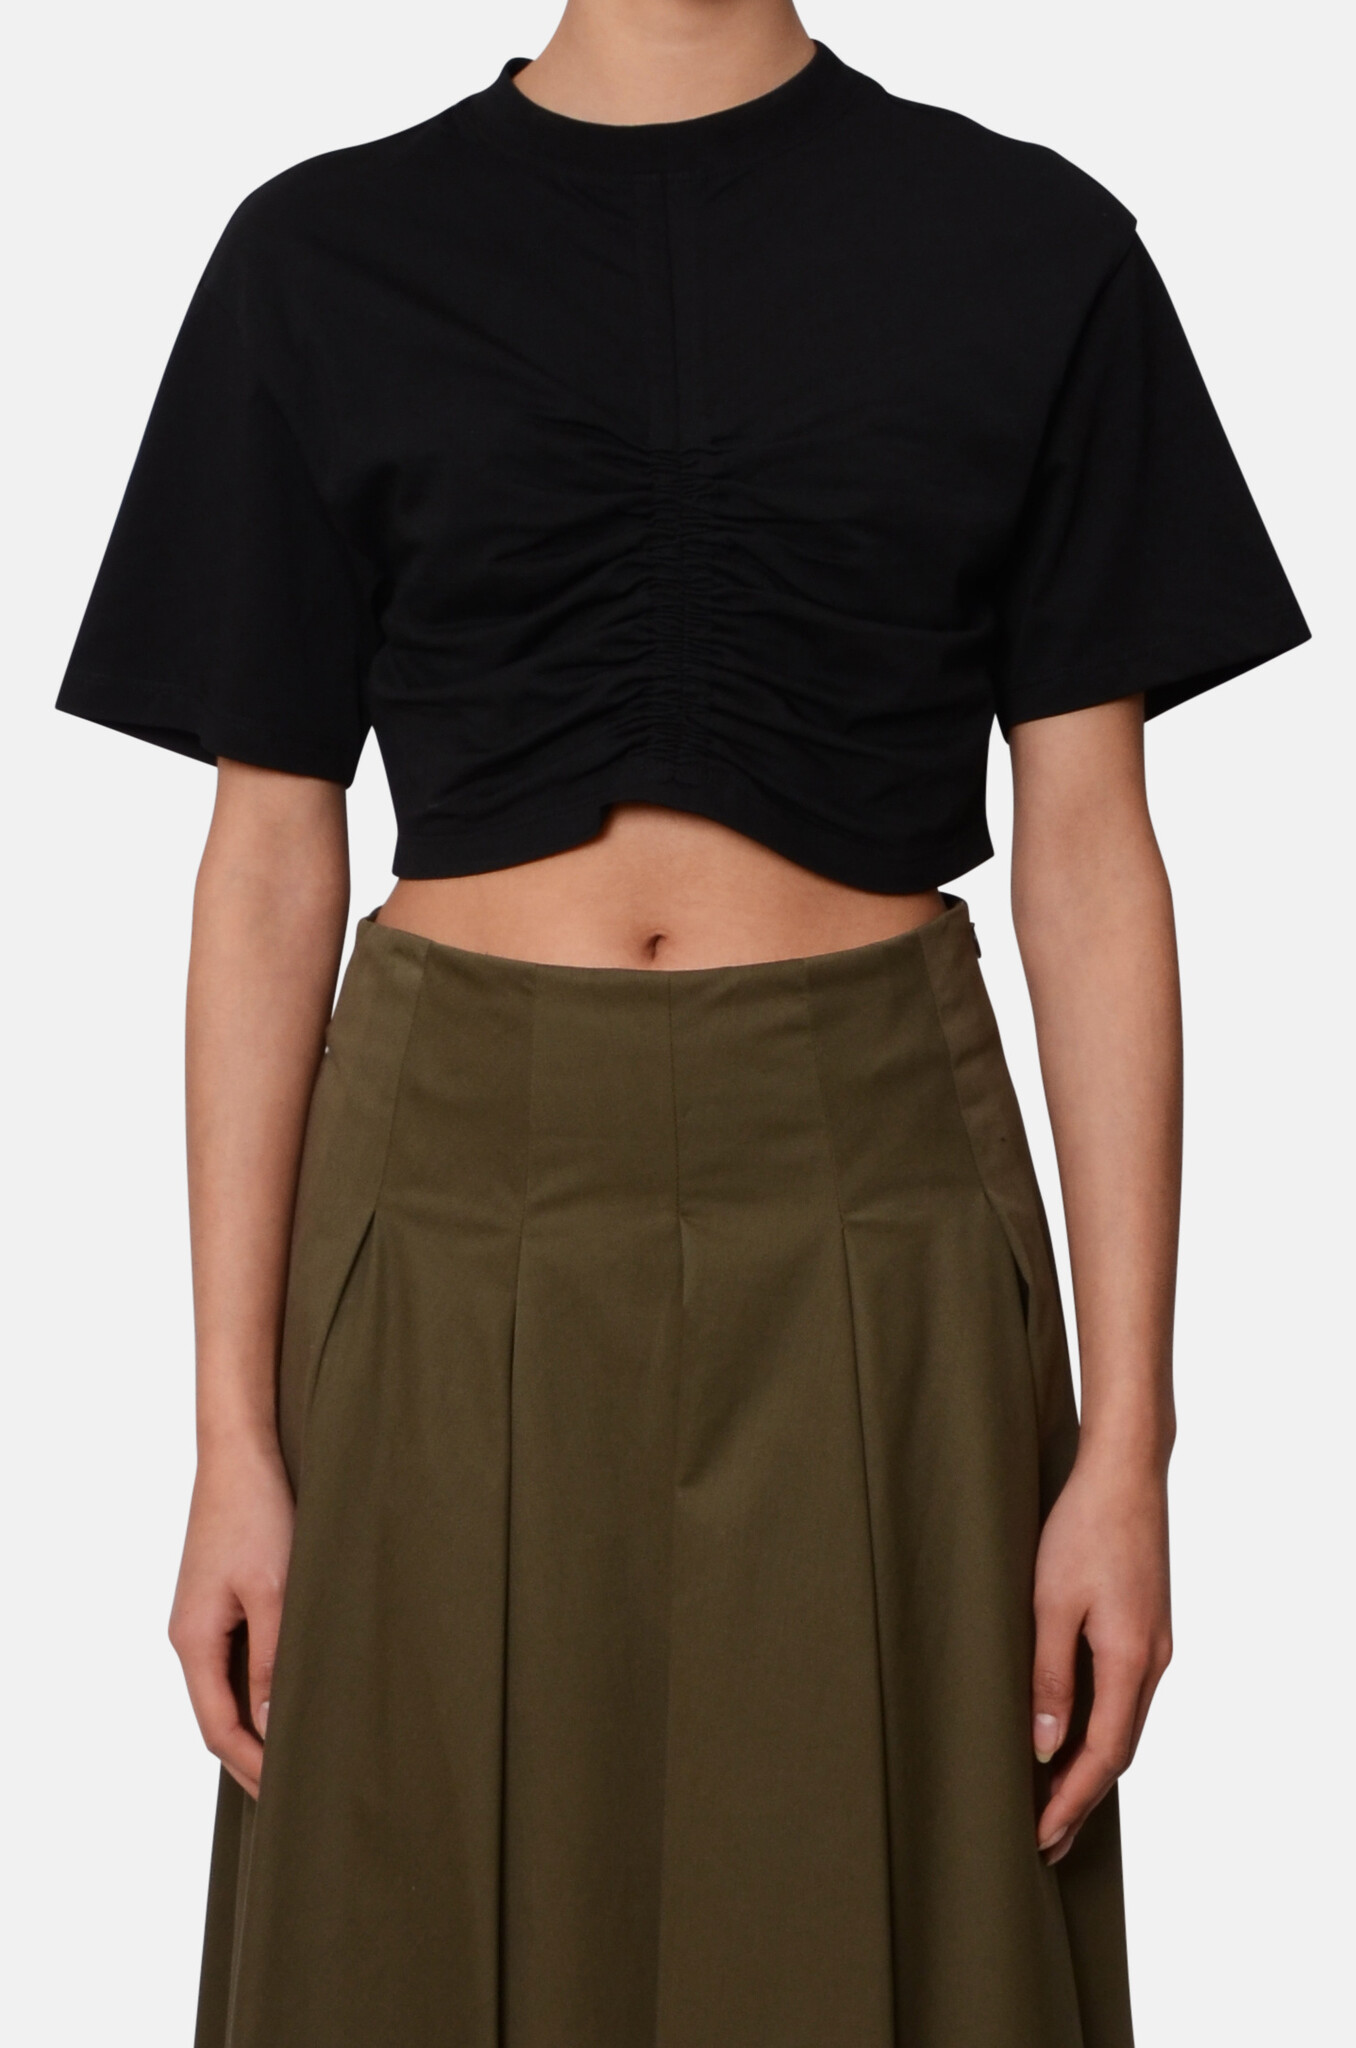 Ruched Tee in Black-1